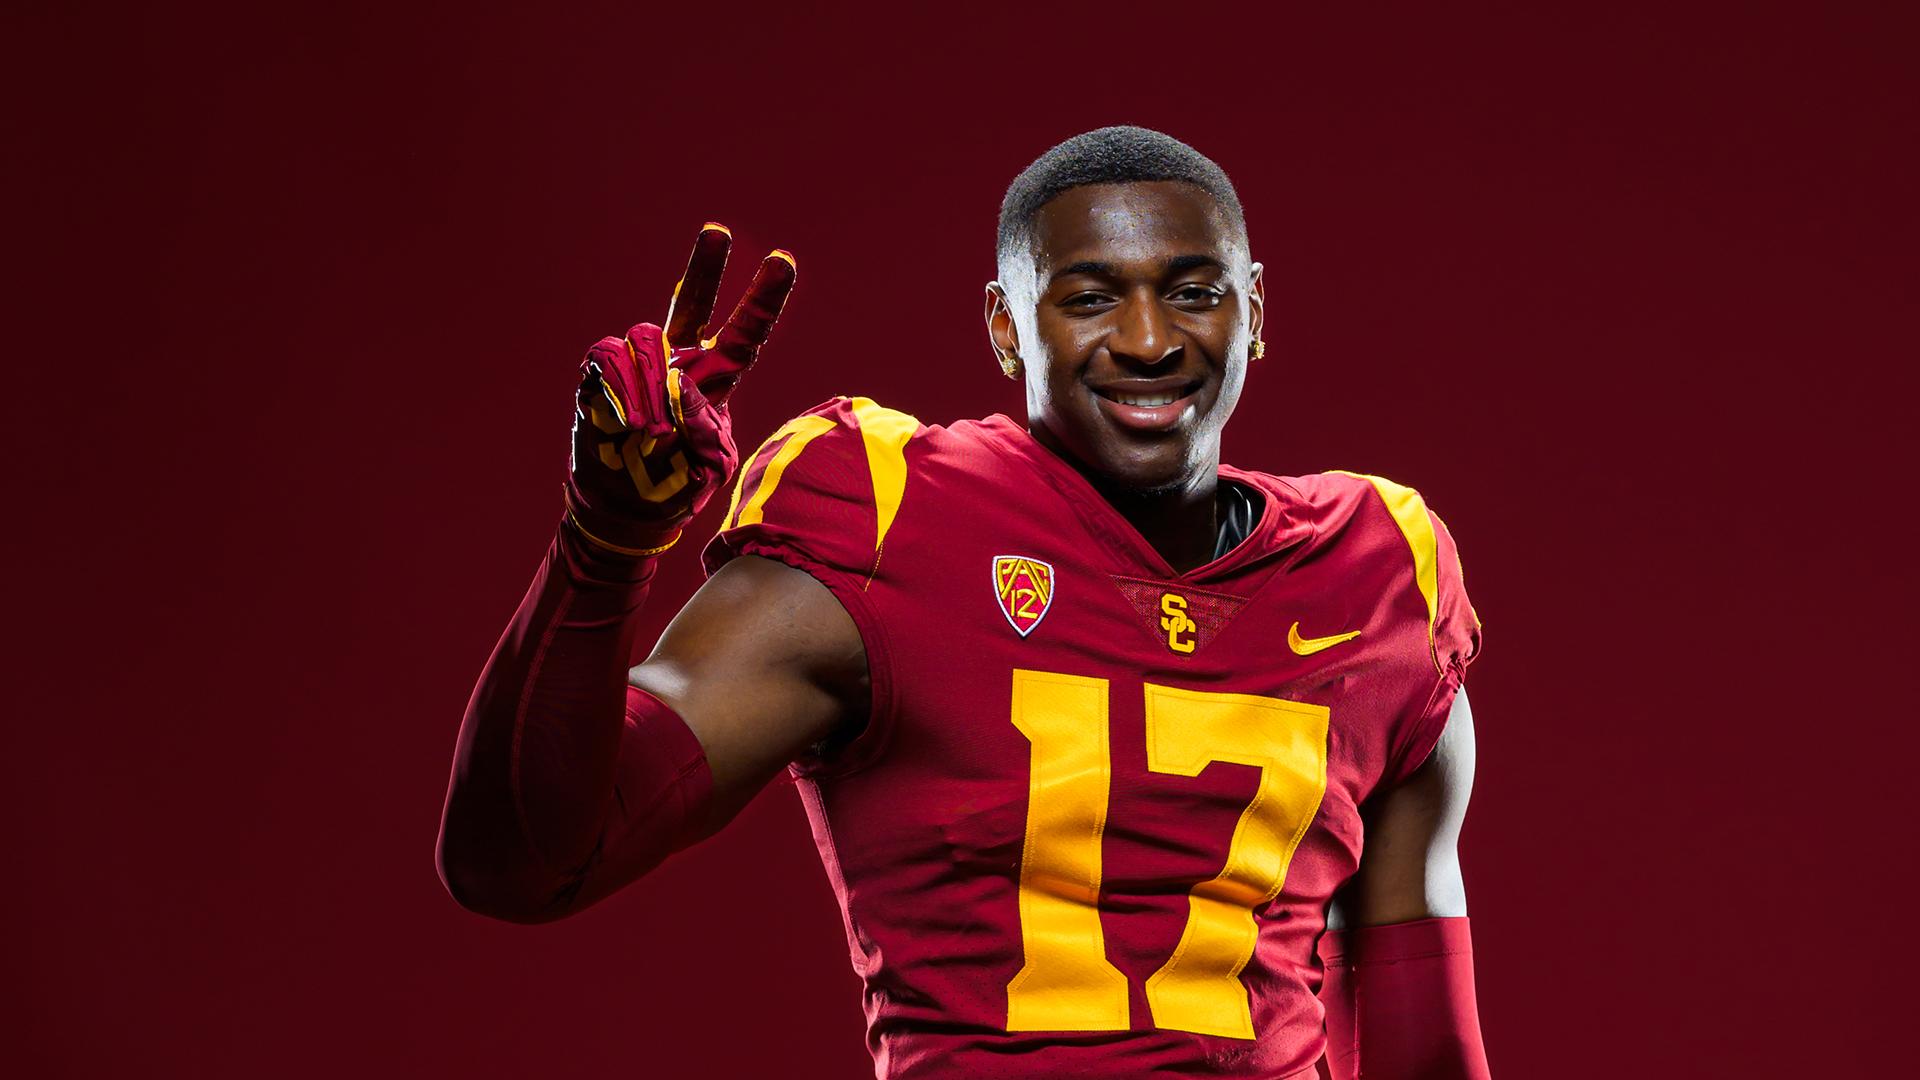 Christian Roland-Wallace is an experienced DB who transferred to USC from Arizona. He possesses above-average lateral quickness and solid change of direction. Hula Bowl scout Ian McNice breaks him down as an NFL Prospect in his report.